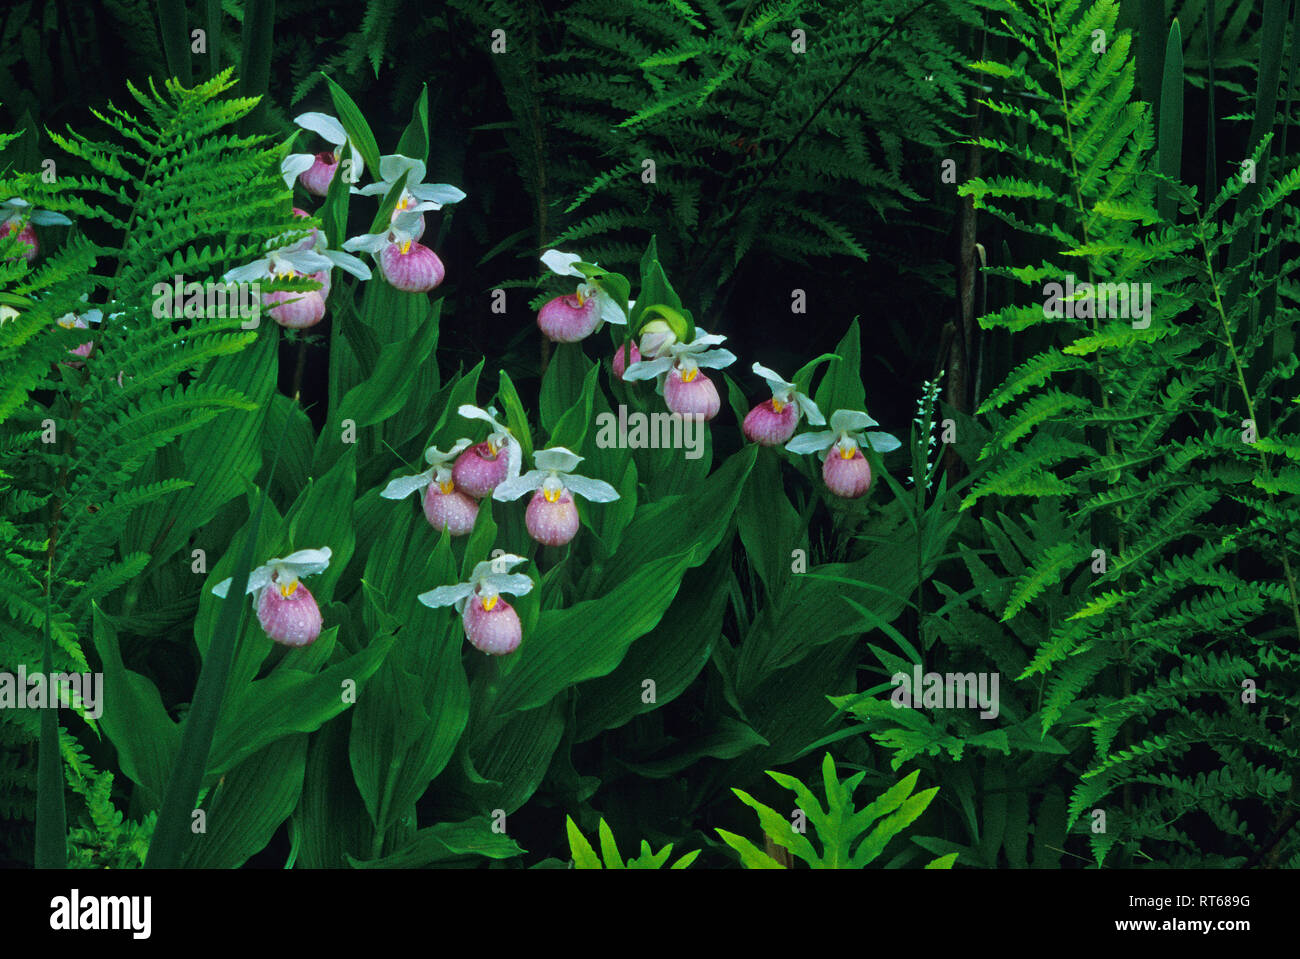 Showy lady slipper orchids in bloom Stock Photo